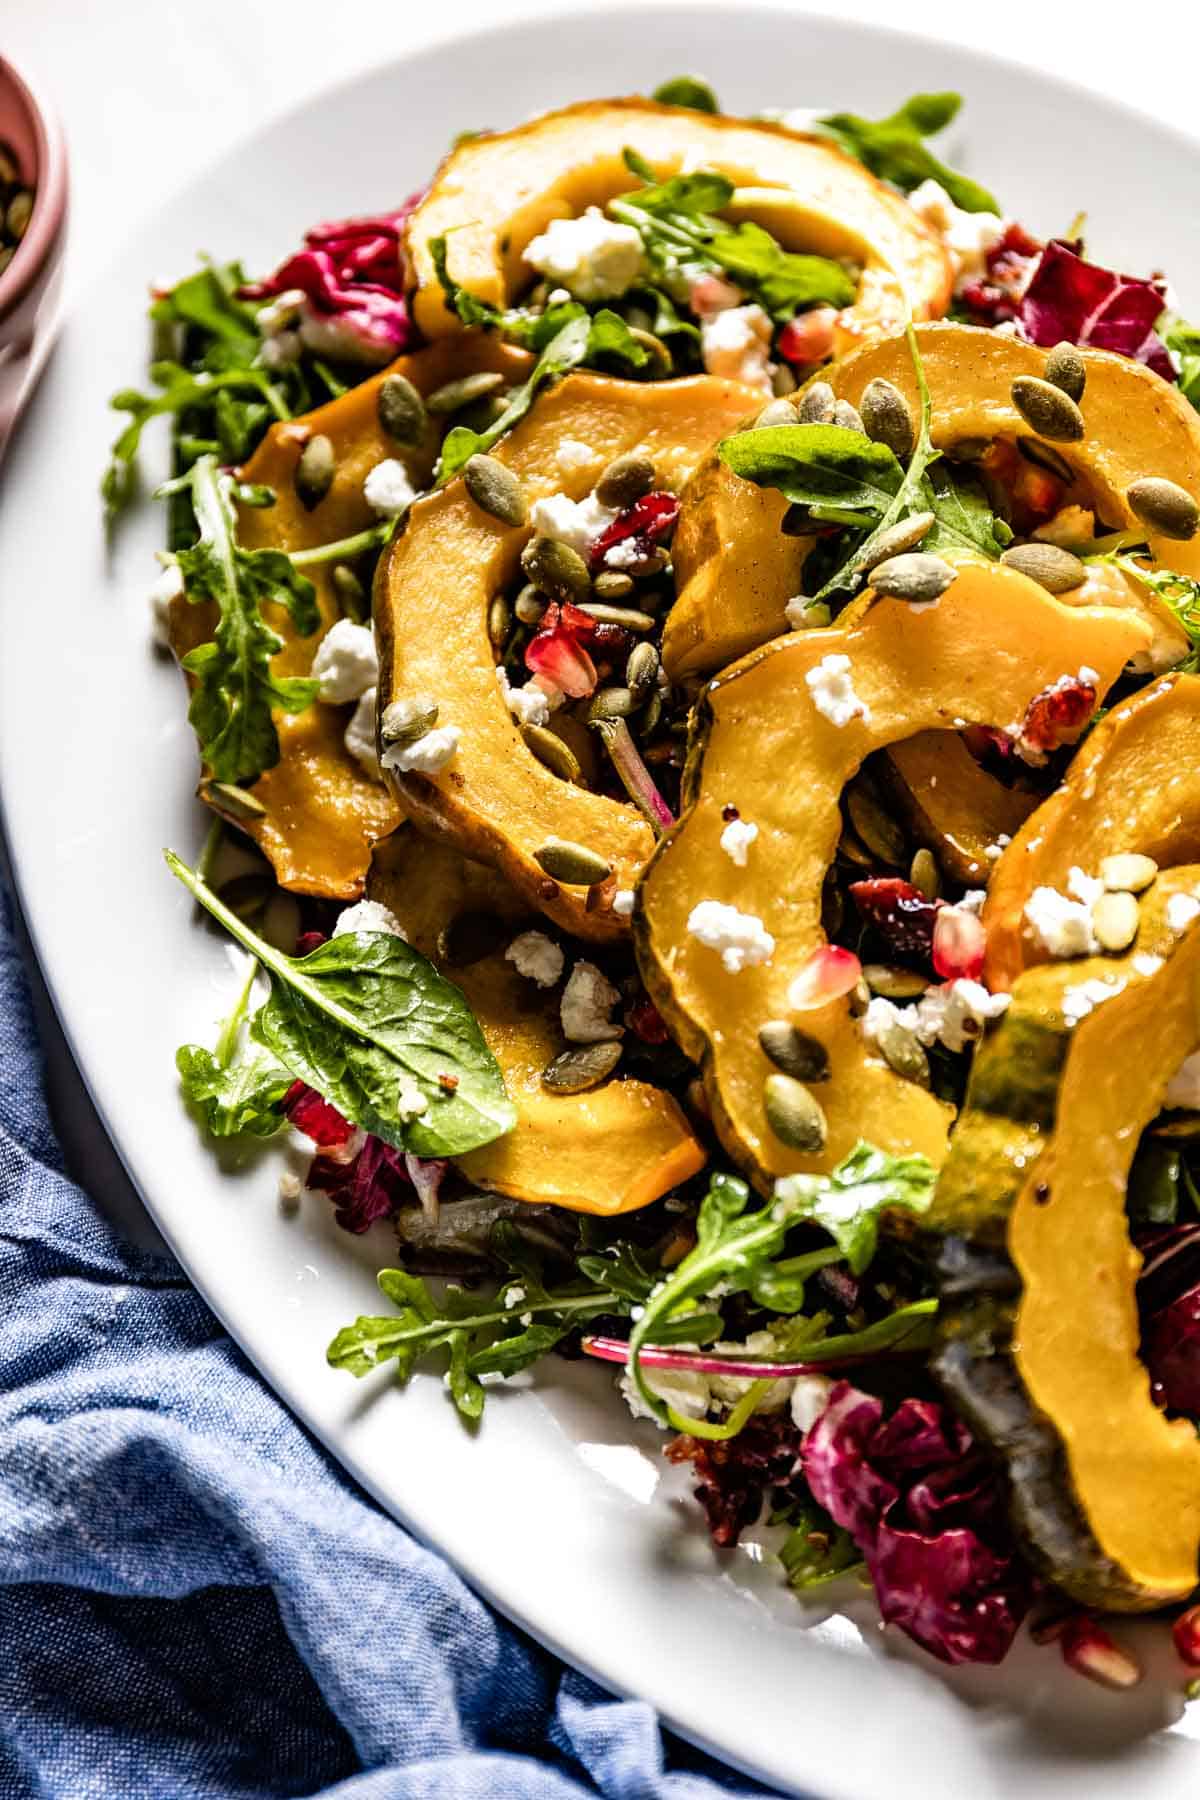 Acorn squash salad in an oval plate.